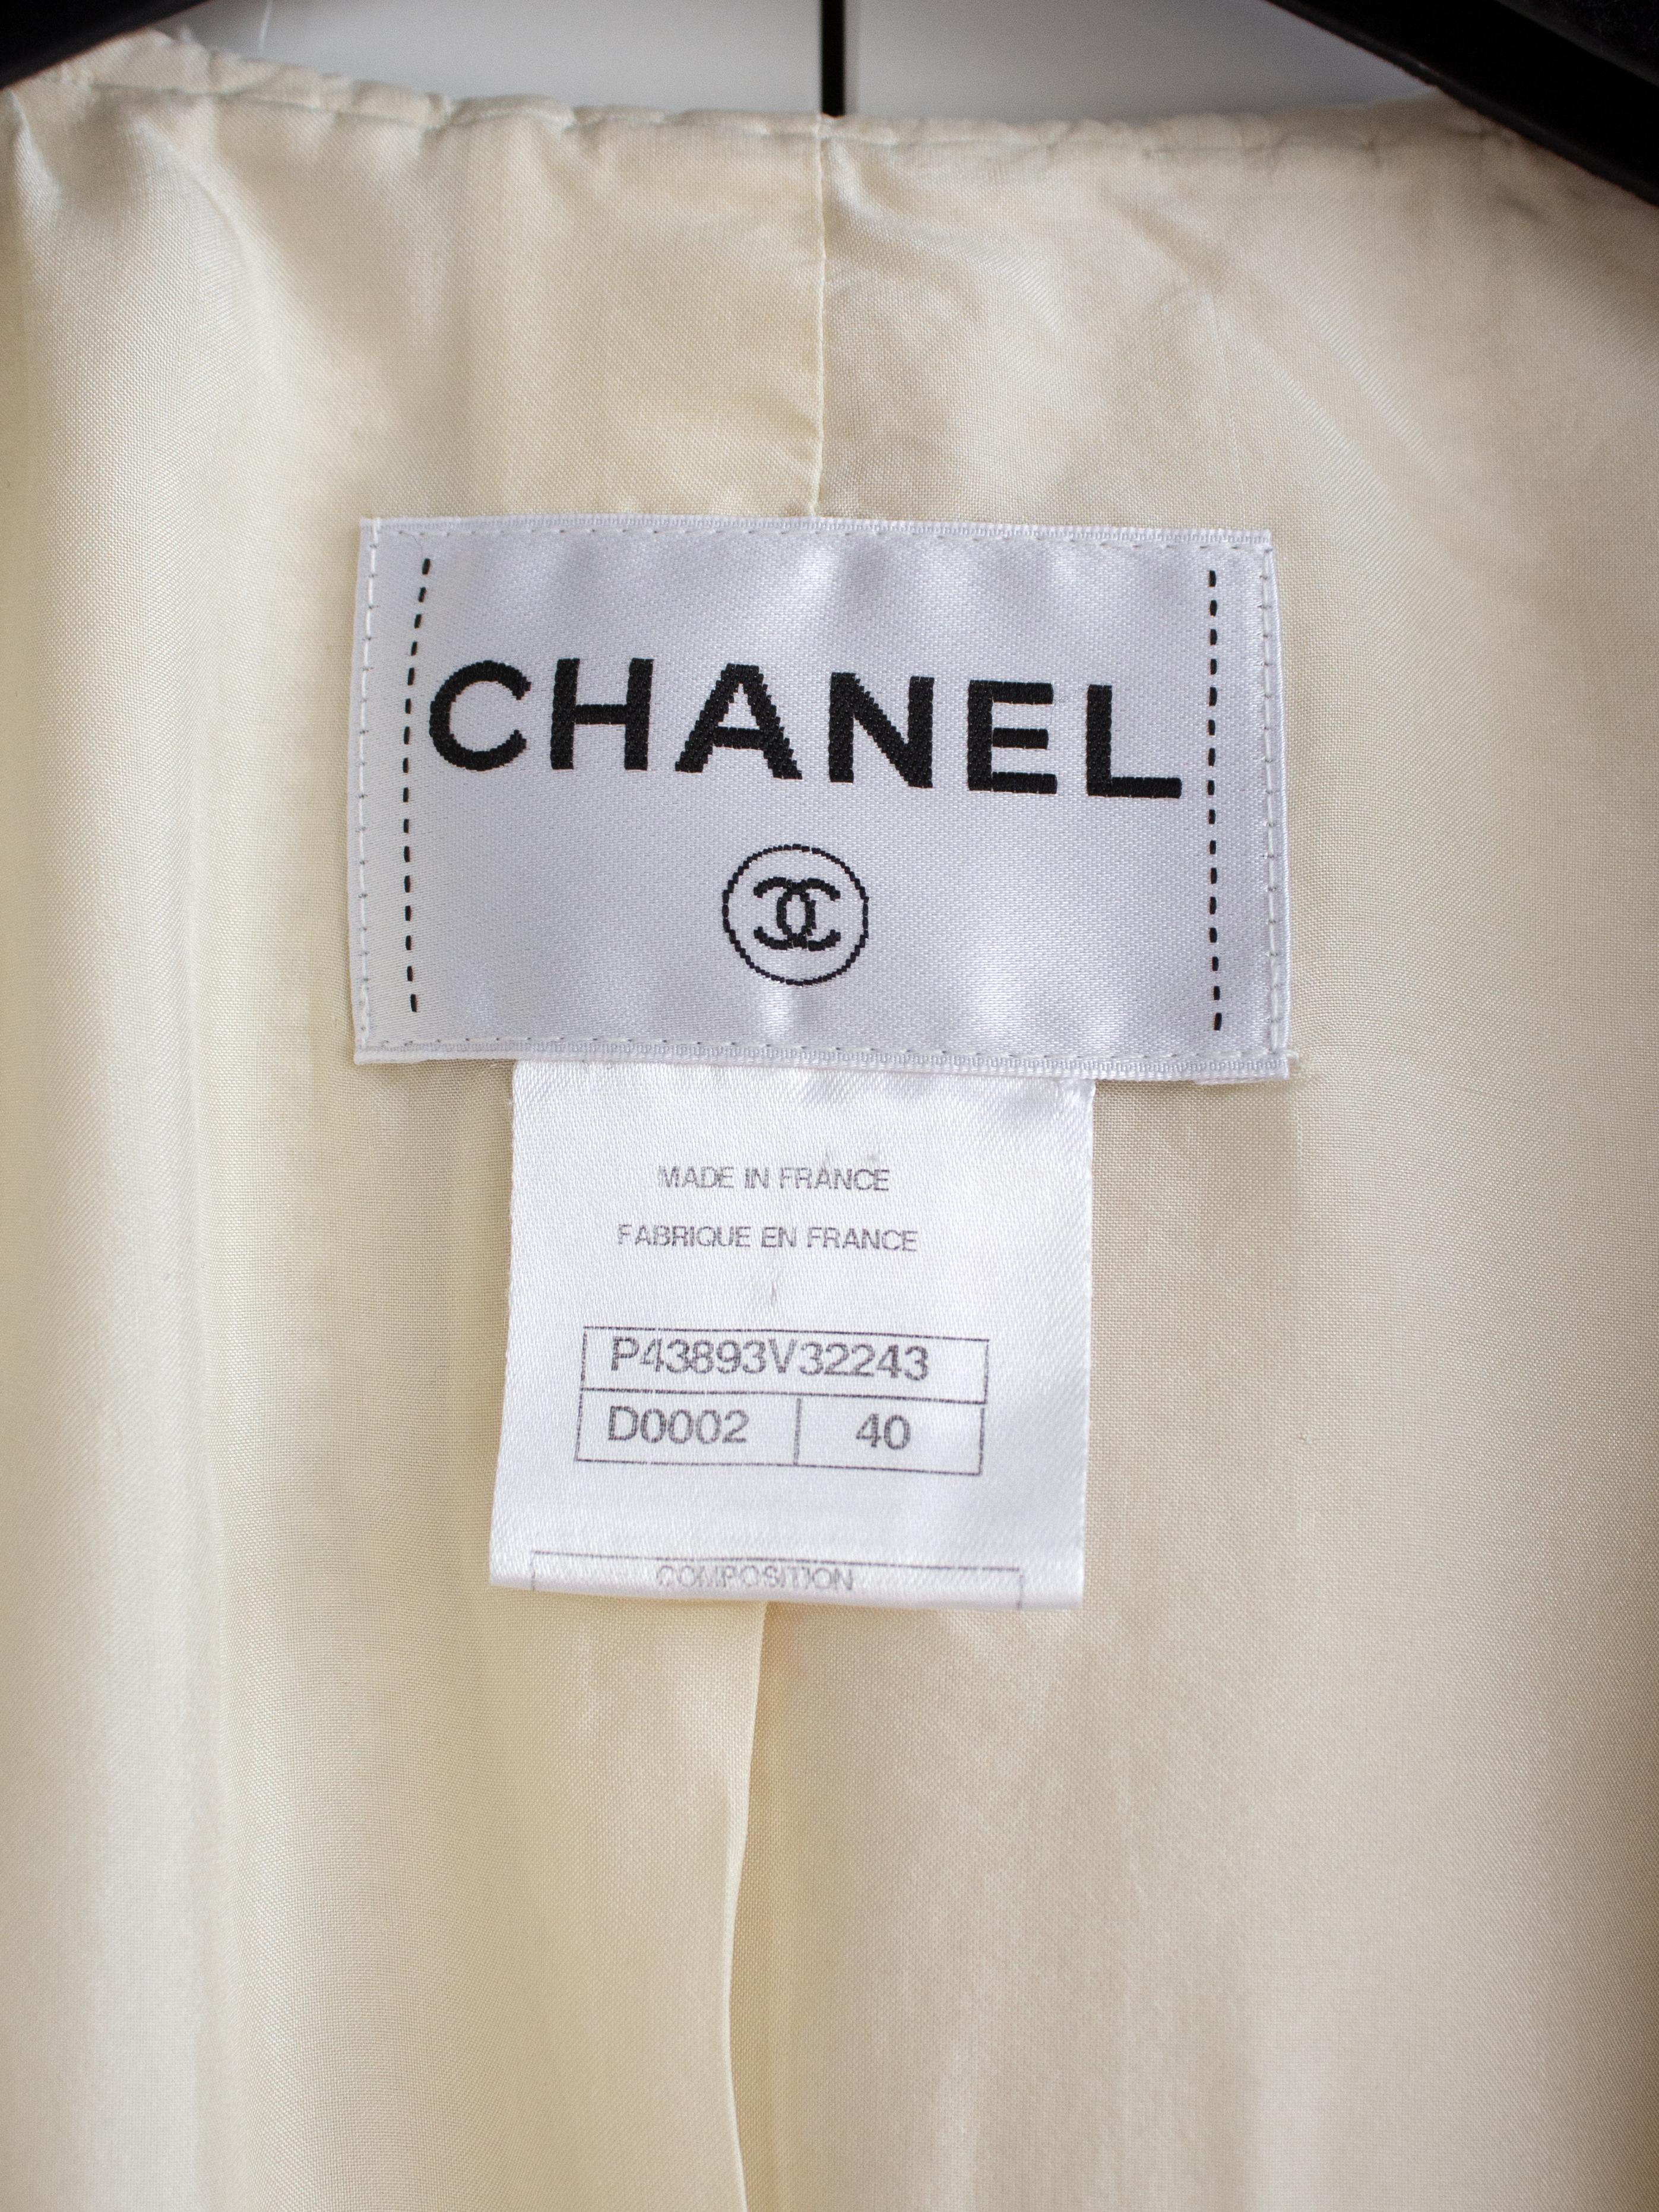 Chanel Pre-Fall 2012 Bombay Ecru Silver Embellished Tweed 12A Jacket Skirt Suit 10